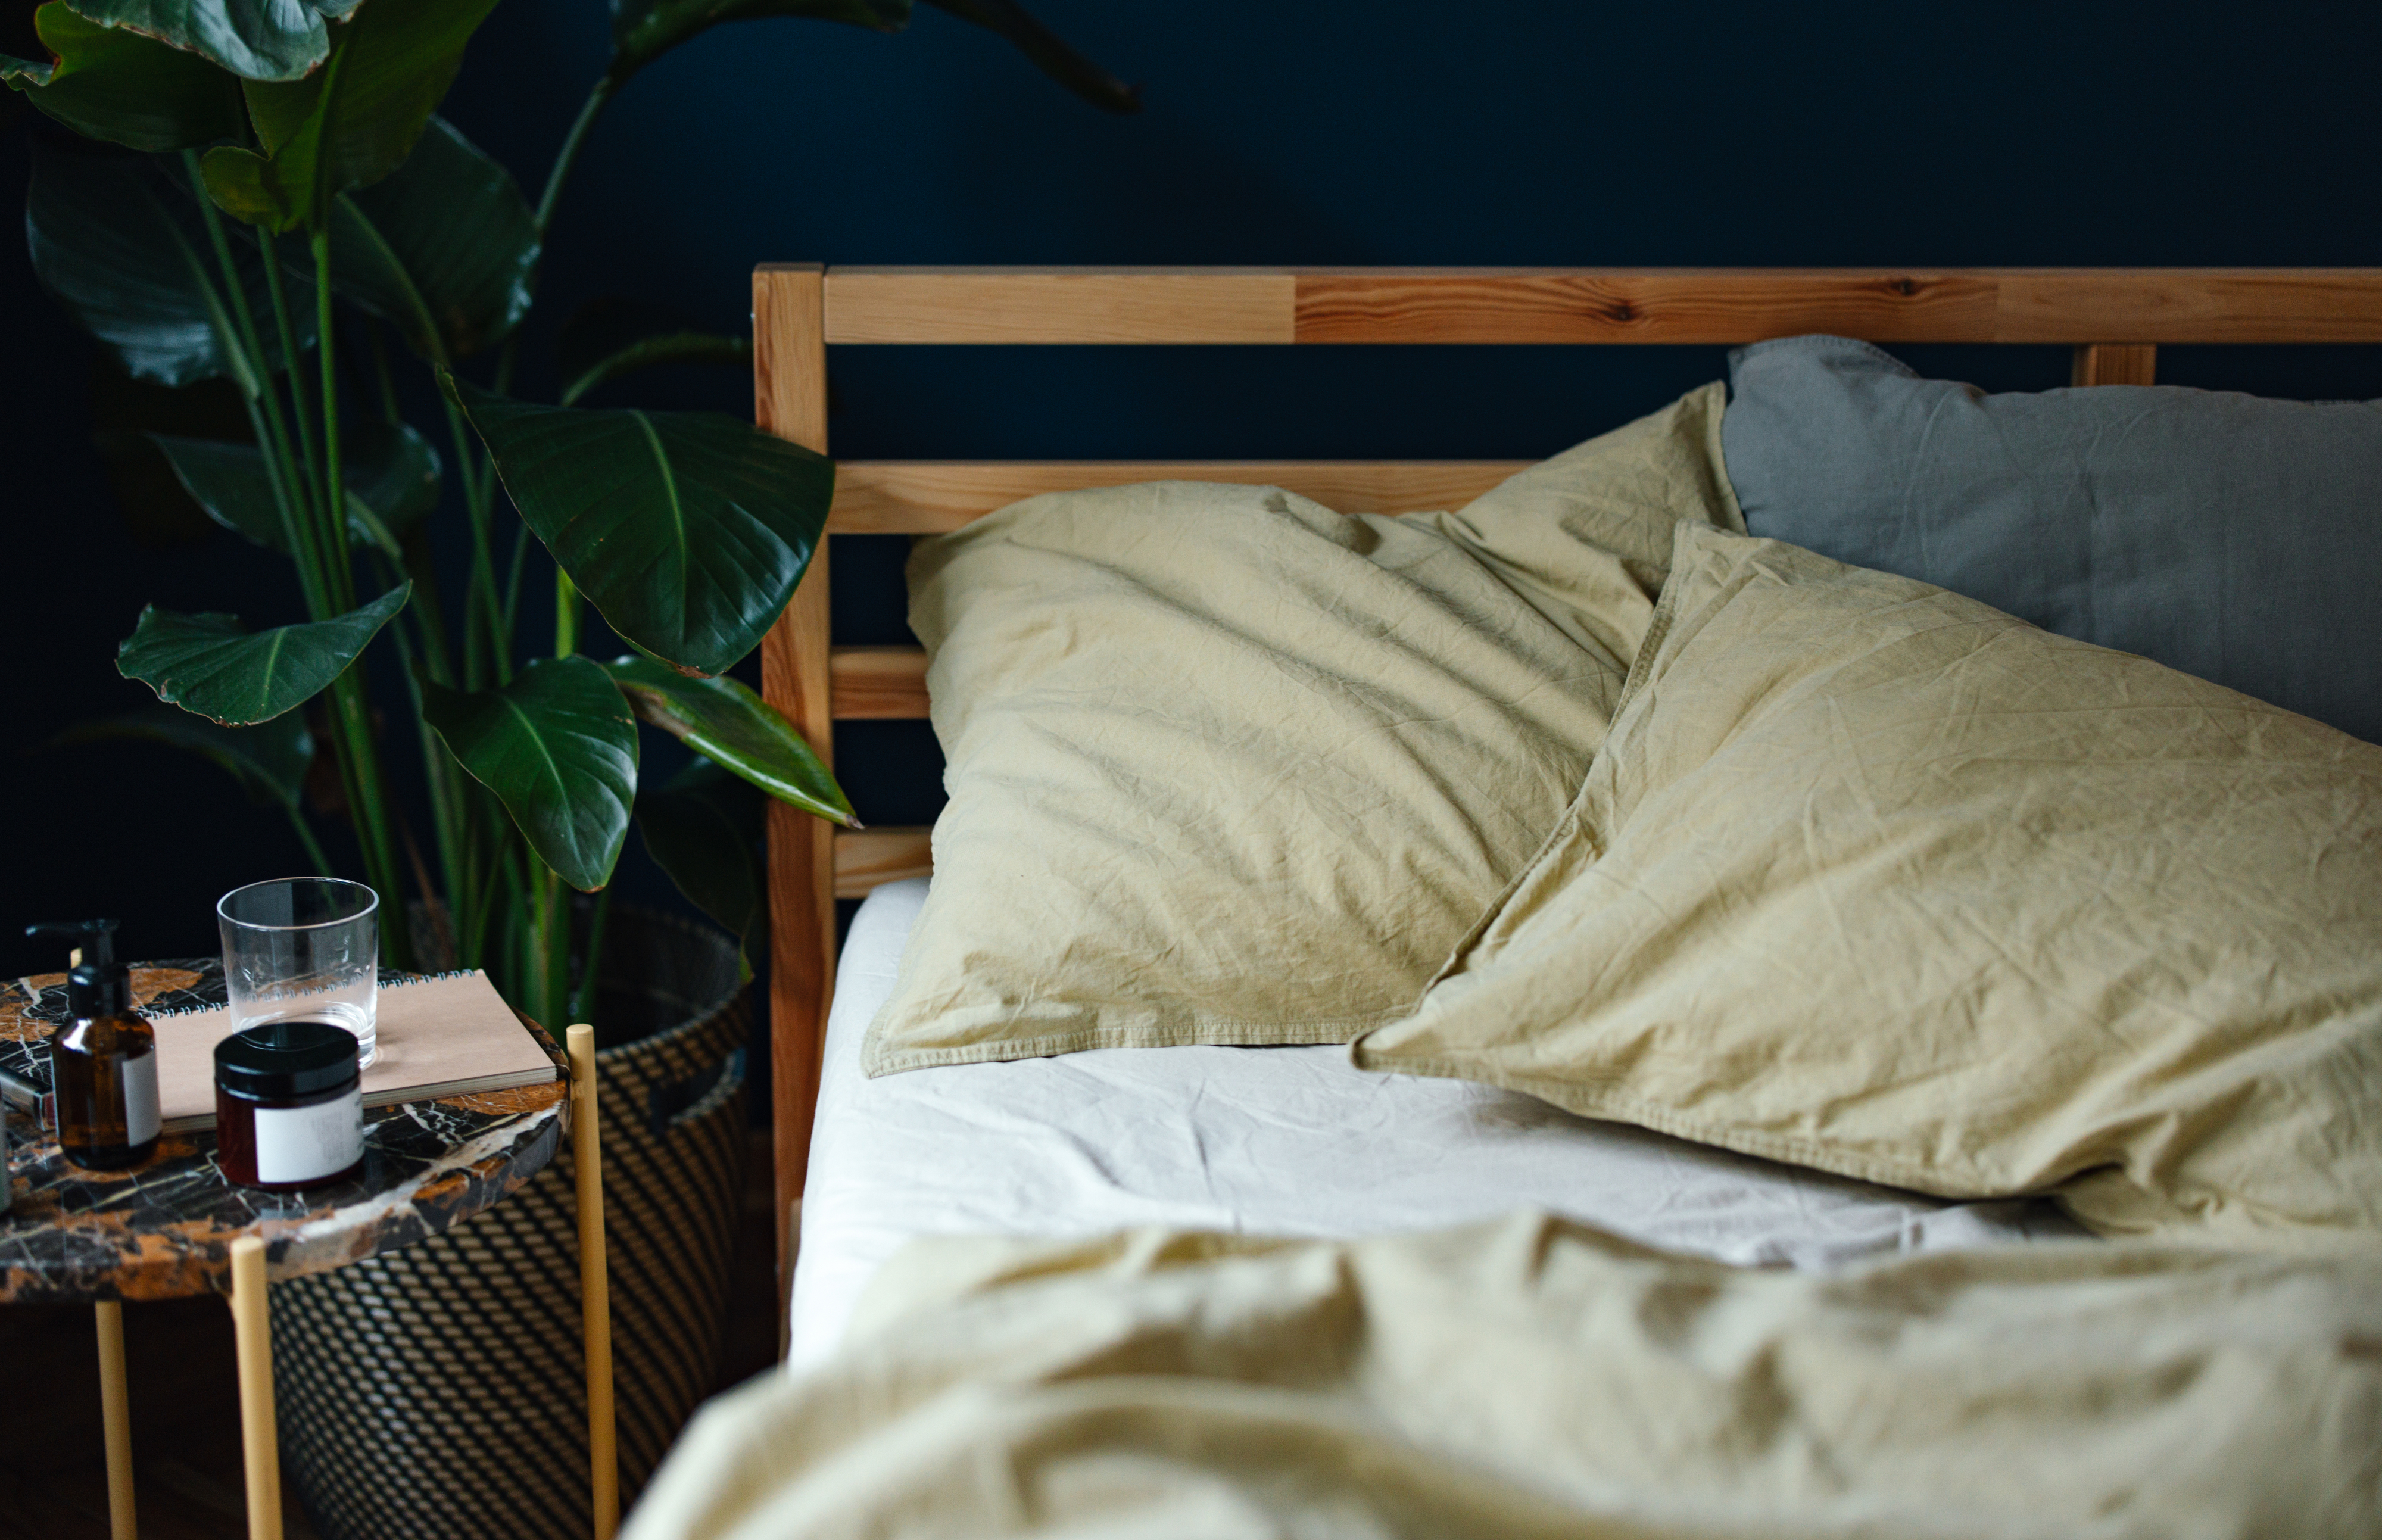 A neatly made bed with beige sheets and pillows. A bedside table holds a glass of water, a candle, and a small bottle. A large leafy plant is placed next to the table